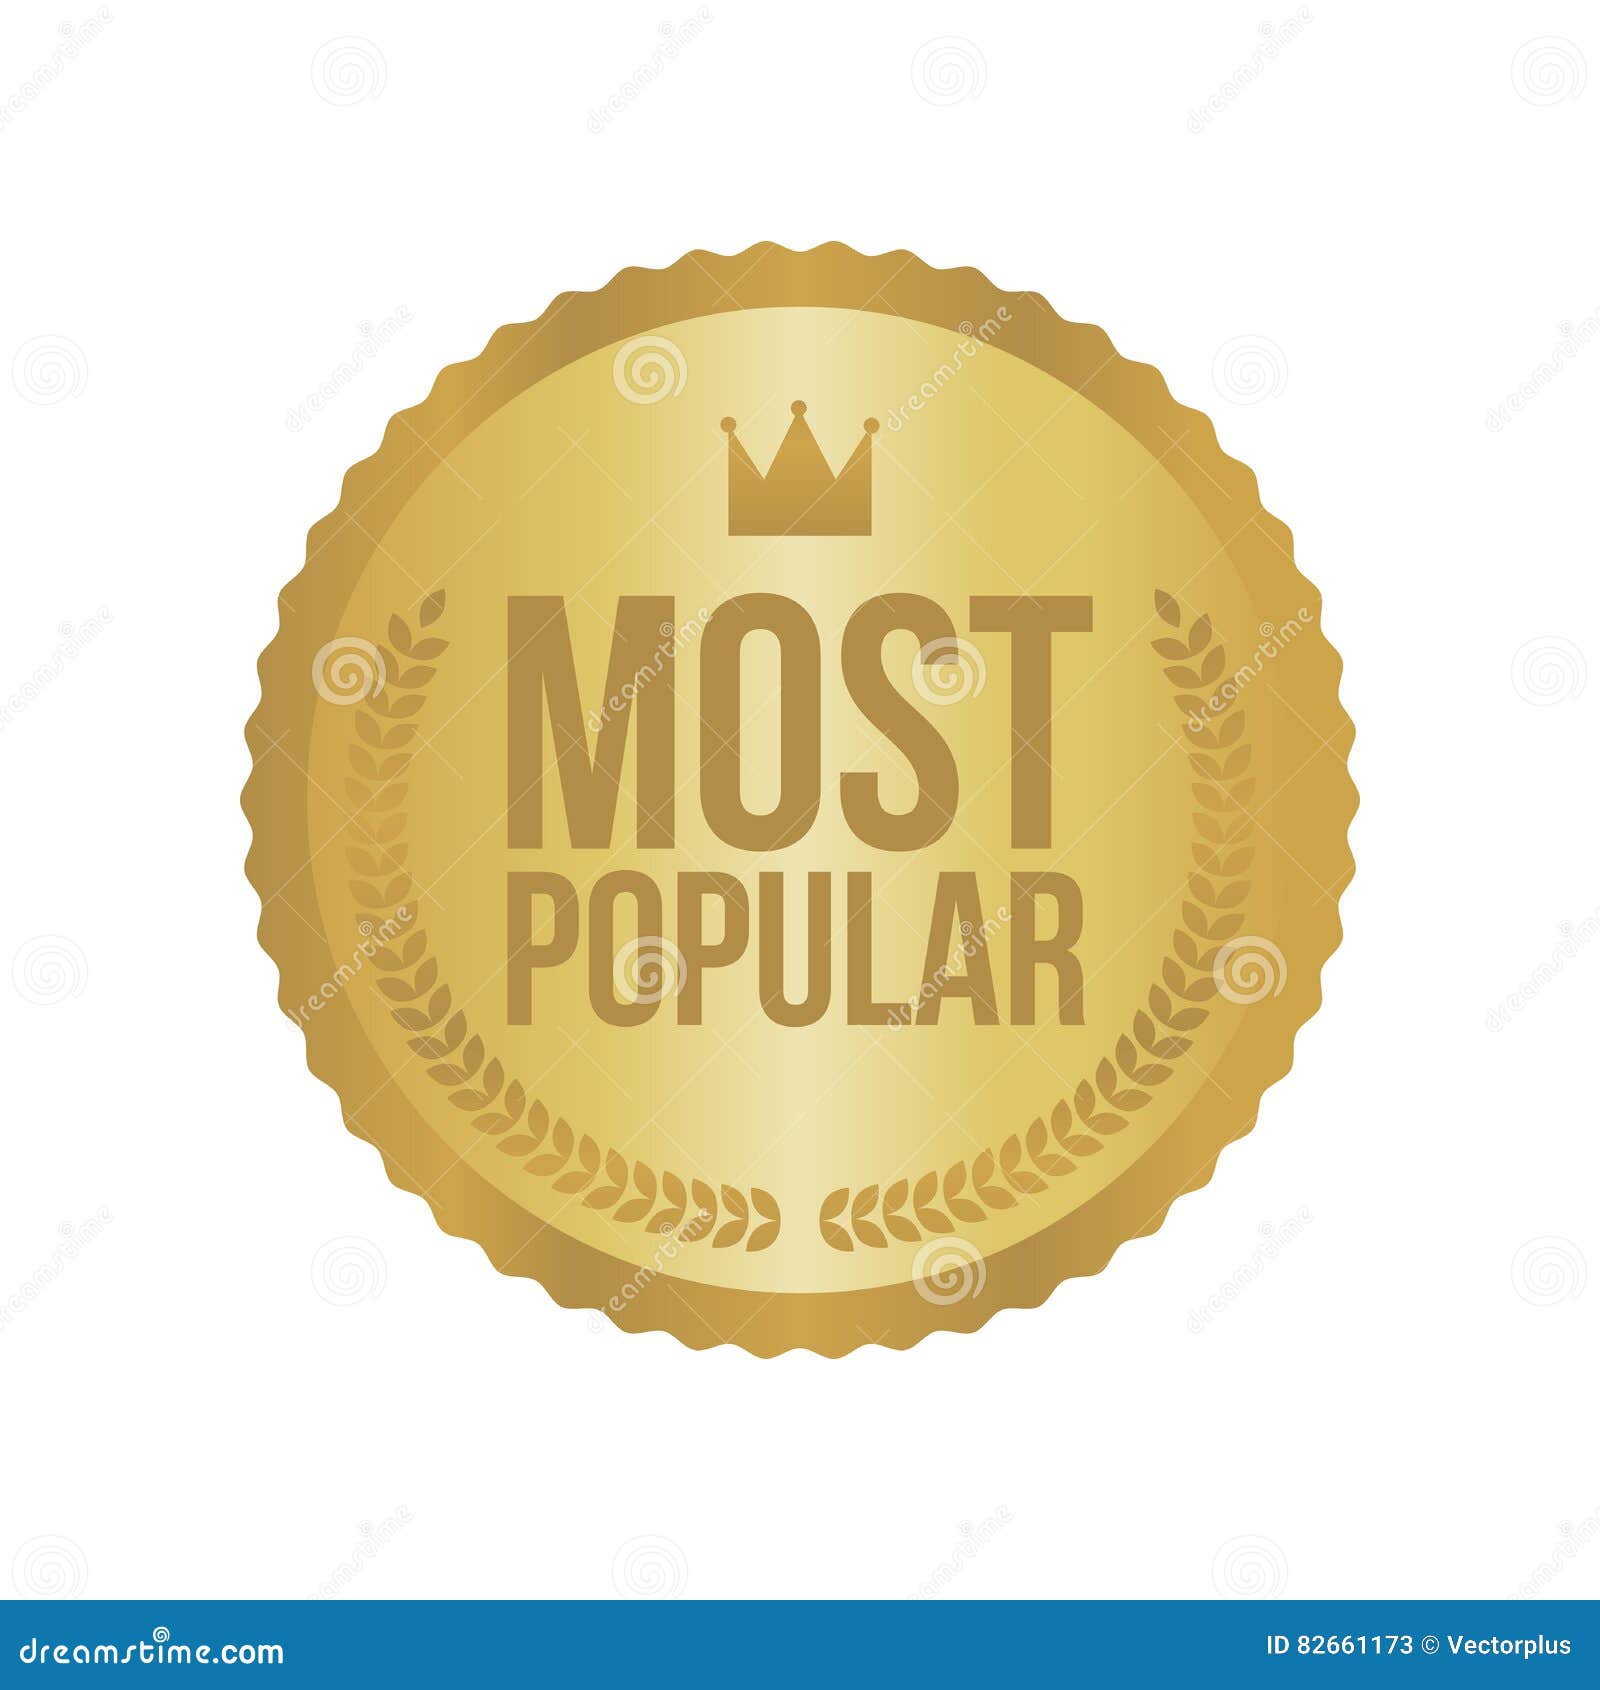  most popular gold sign, round label